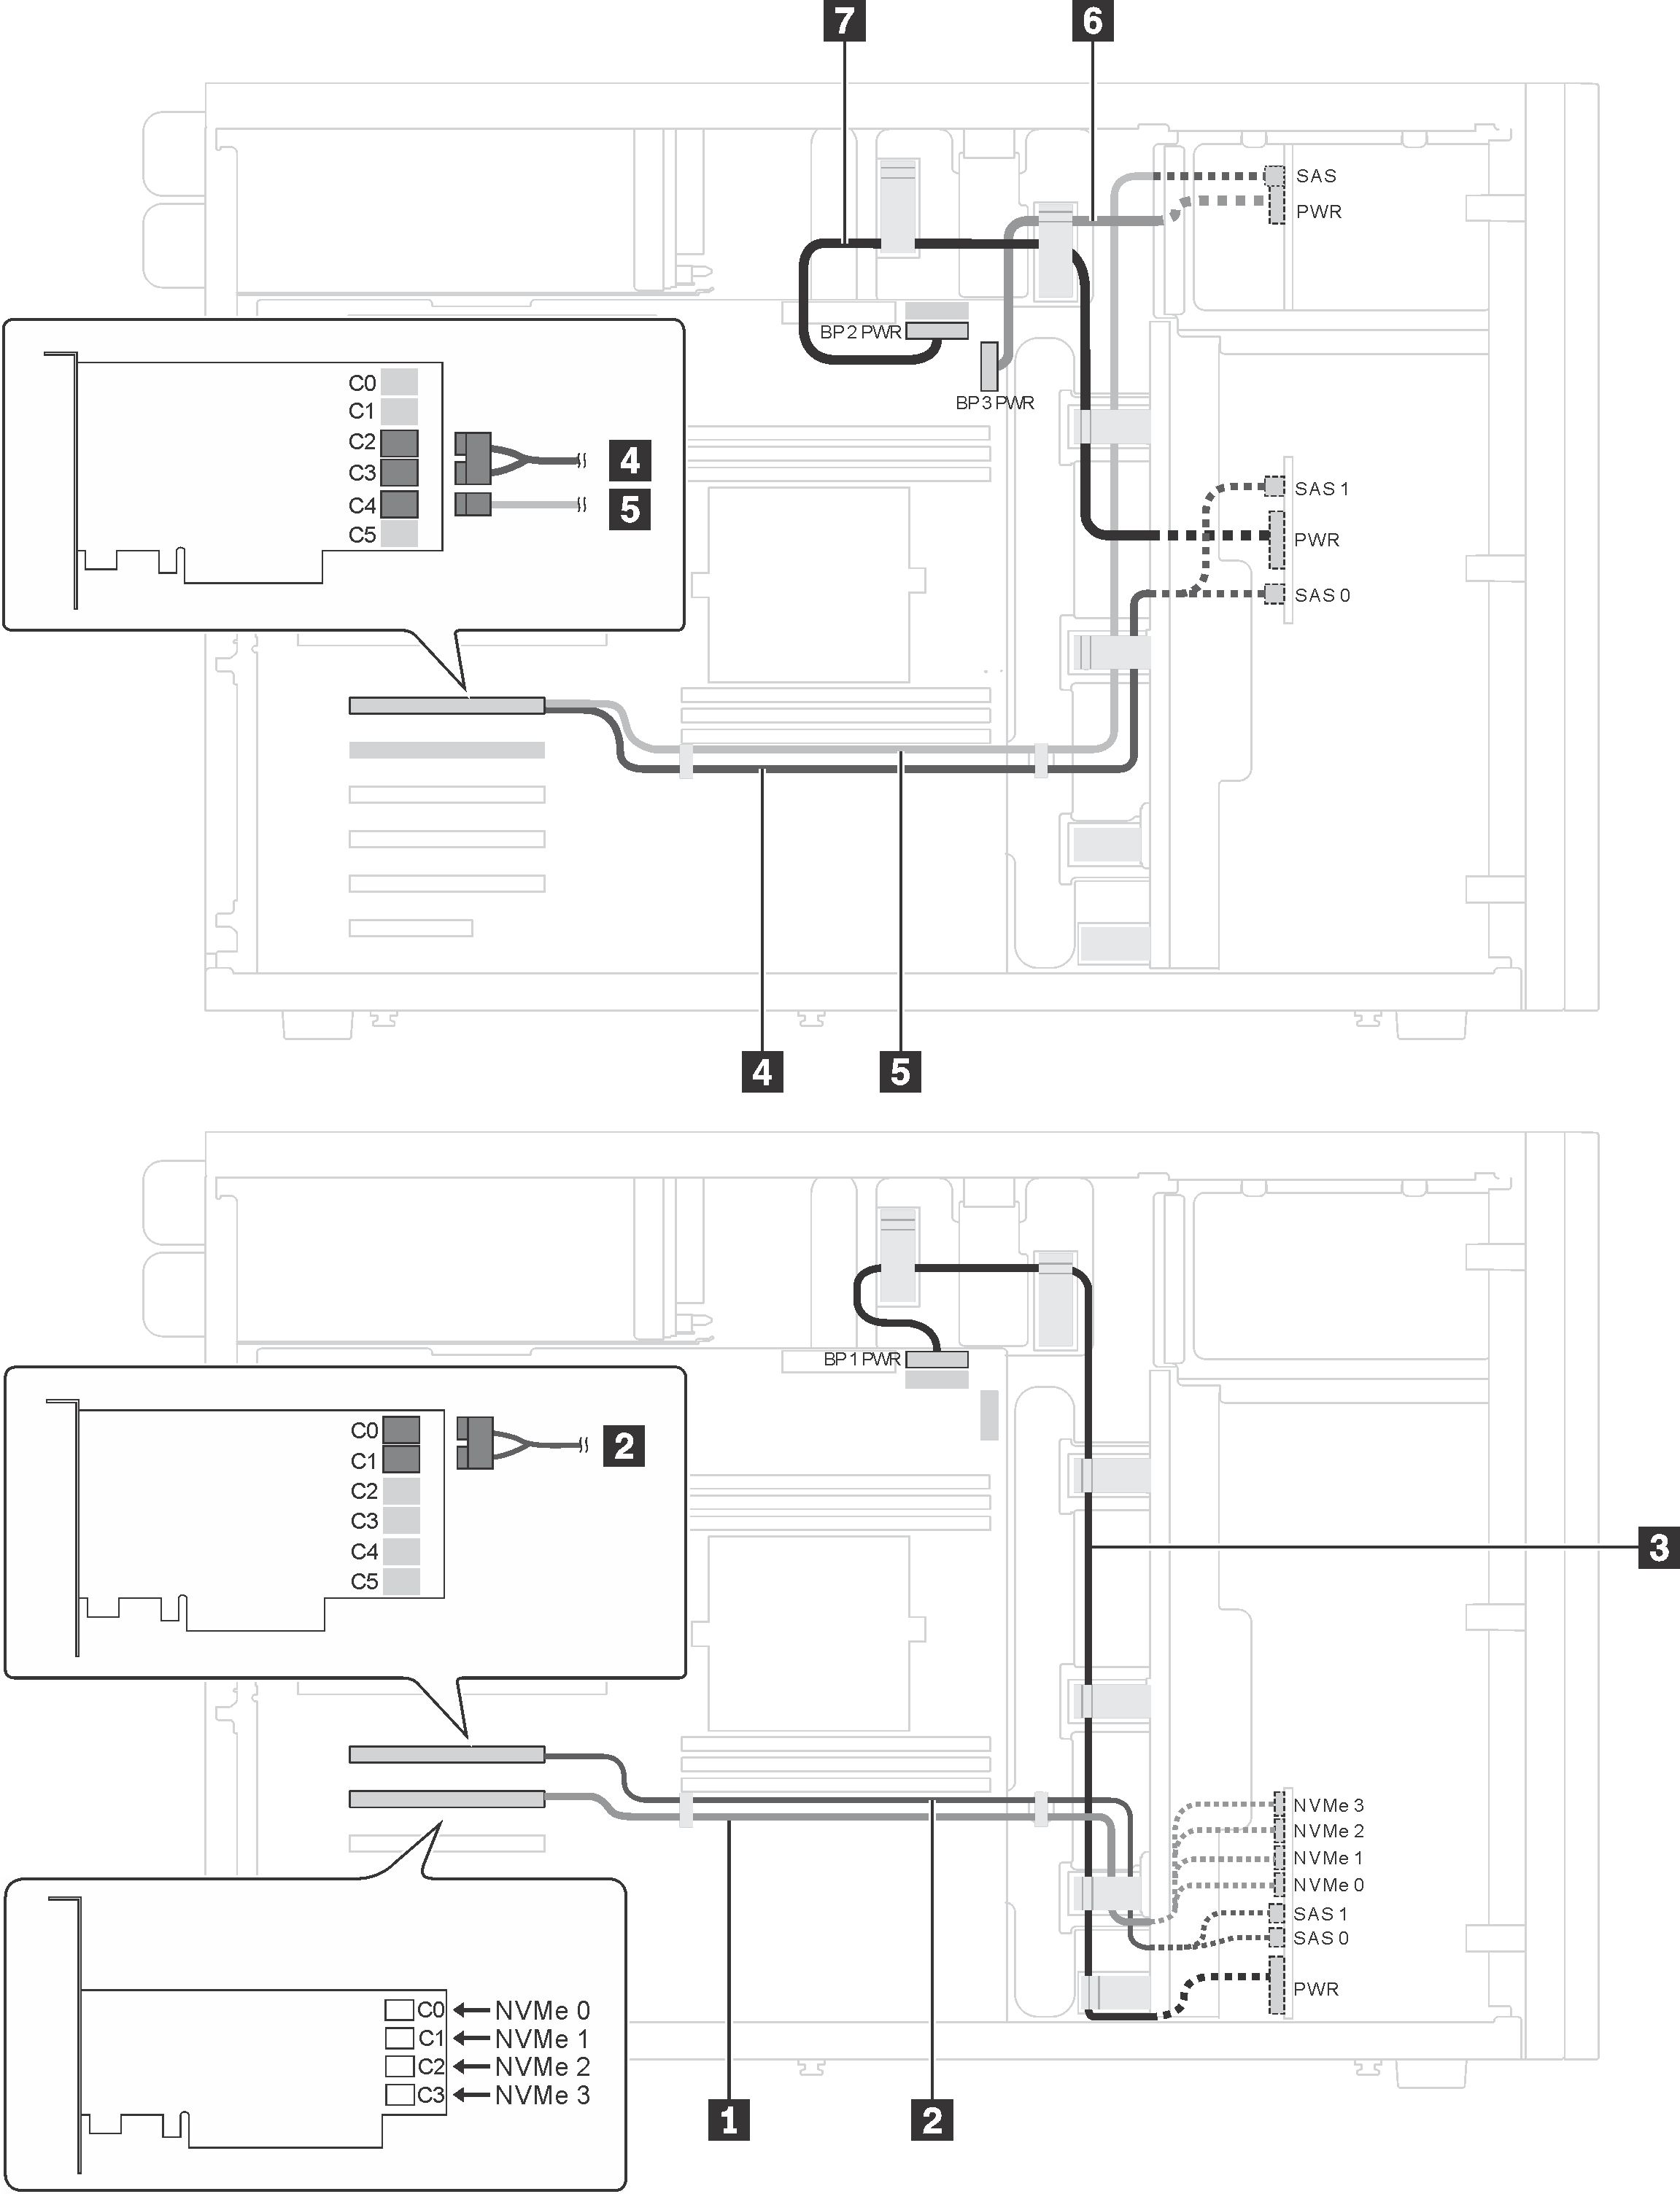 Cable routing for server models with sixteen 2.5-inch SAS/SATA drives, four 2.5-inch SAS/SATA/NVMe drives, one 24i RAID adapter, and one NVMe adapter